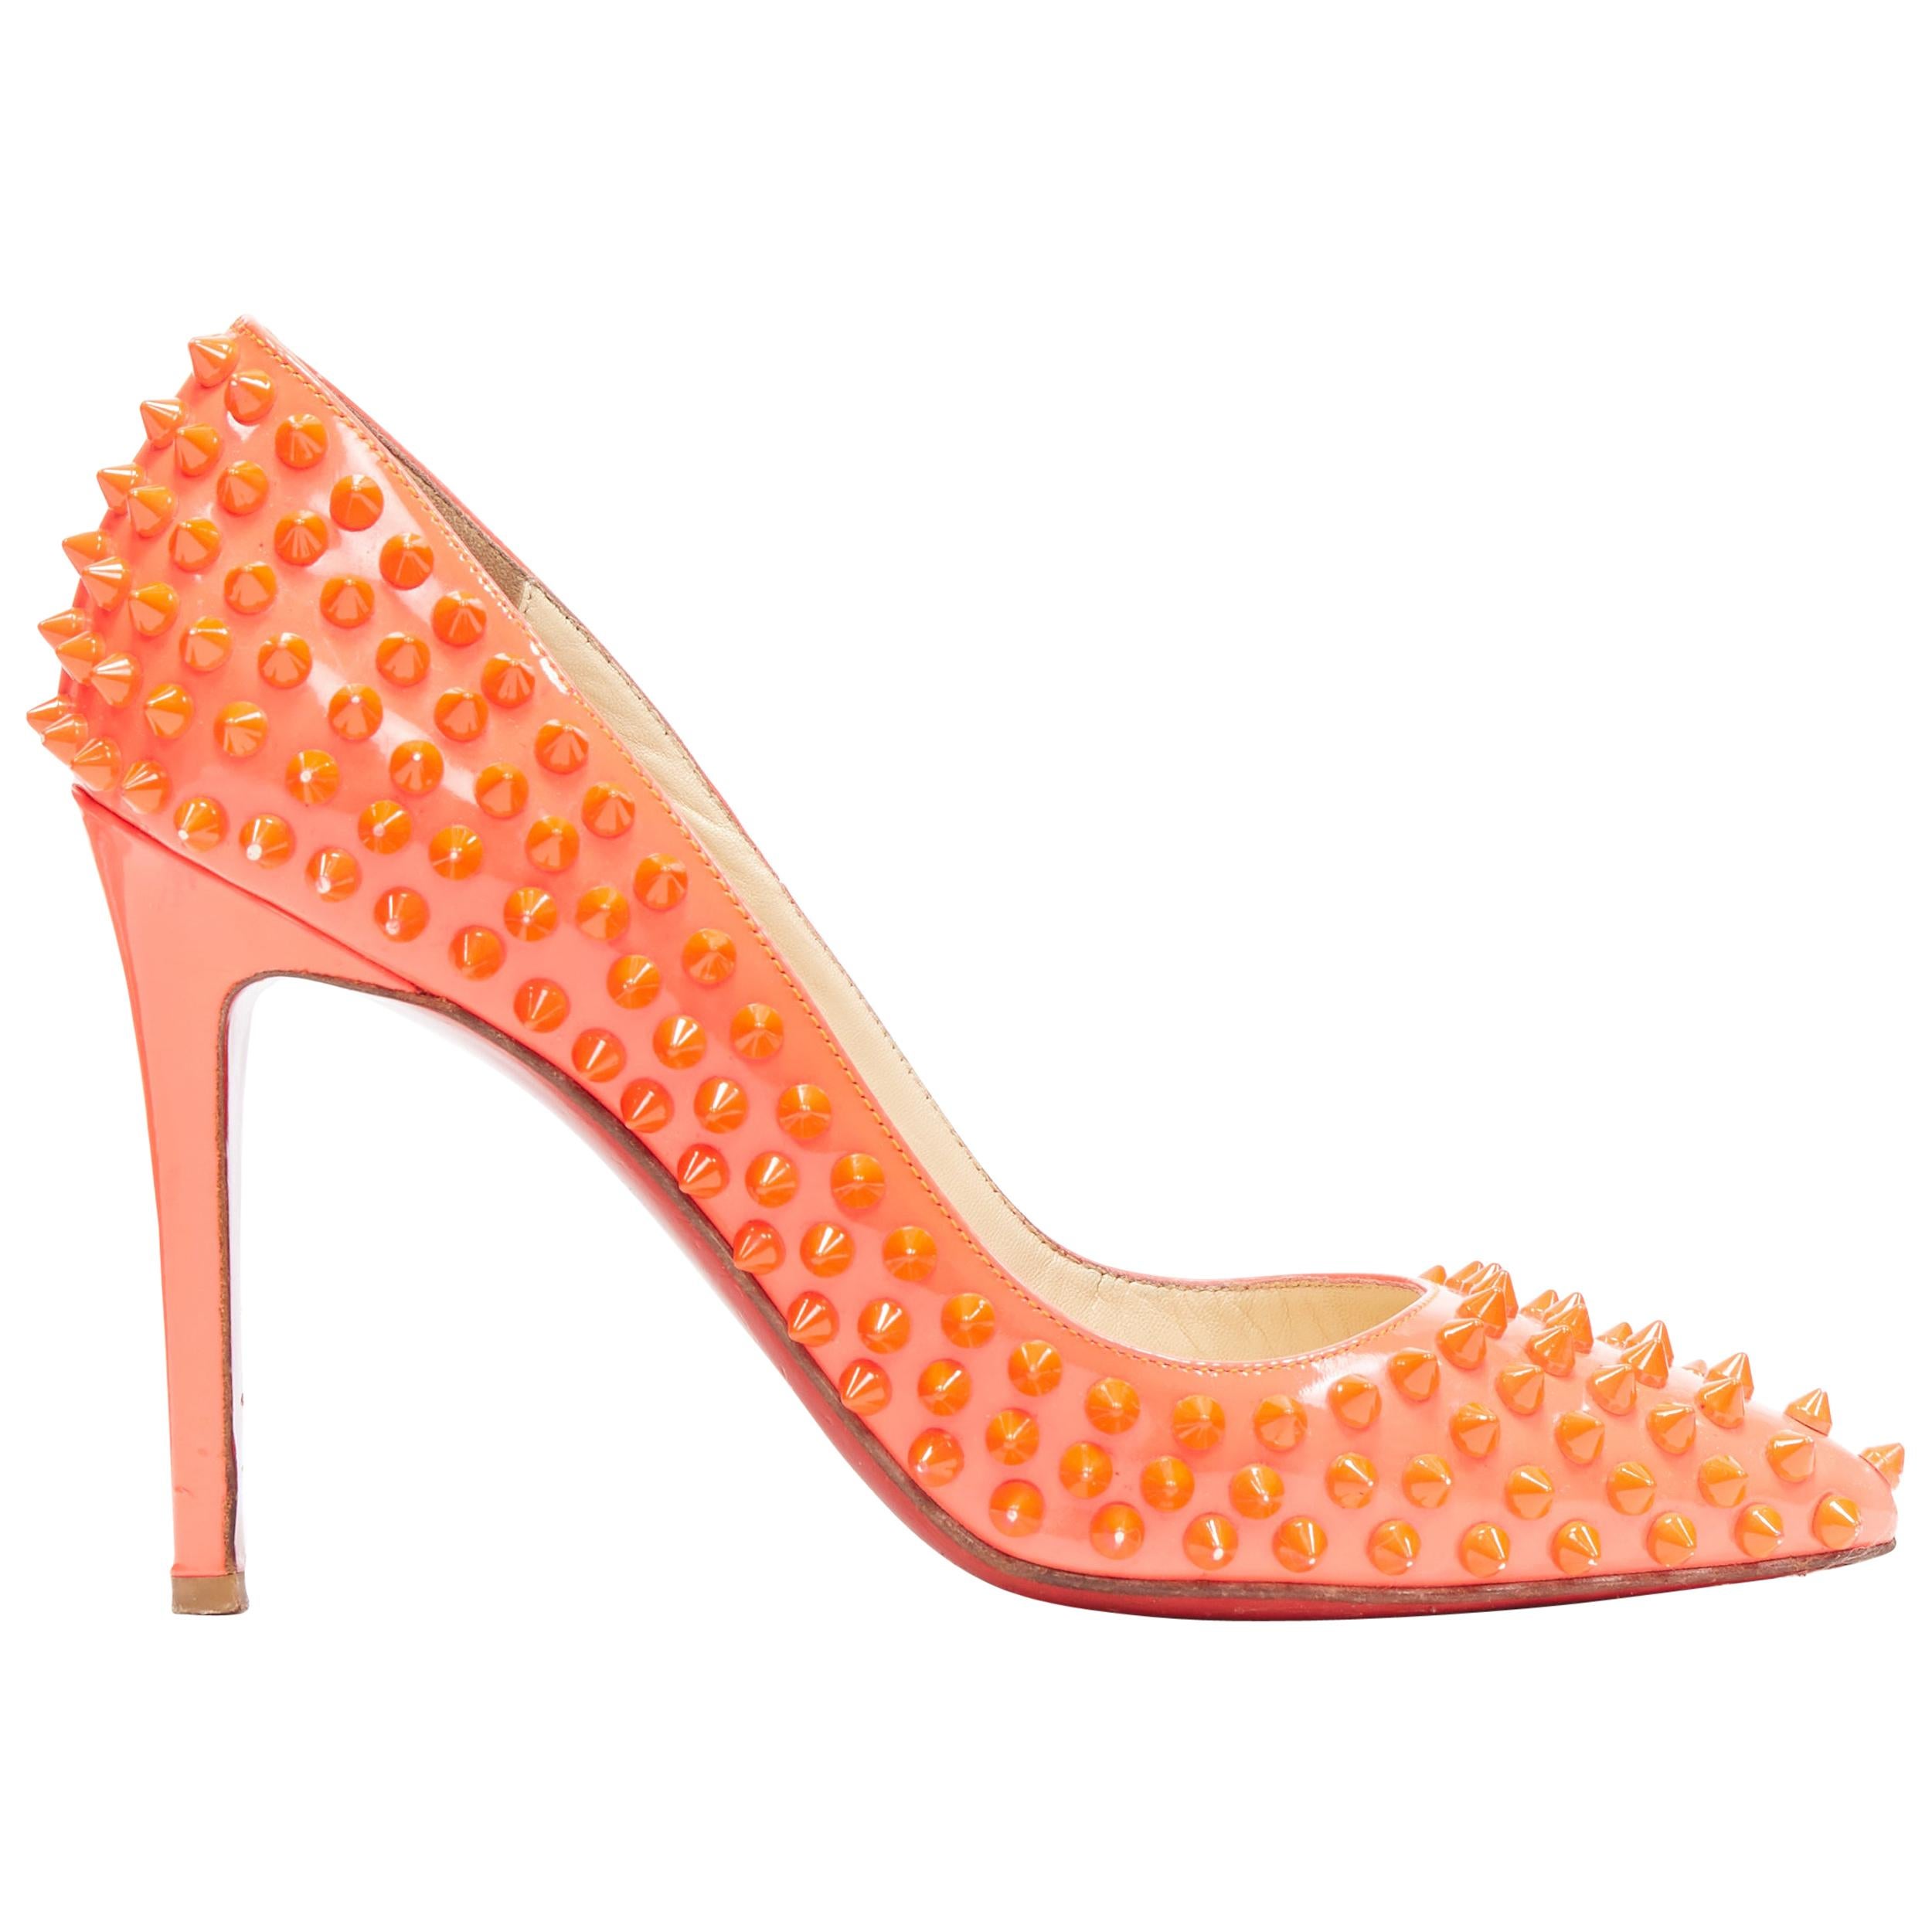 CHRISTIAN LOUBOUTIN neon pink patent spike stud point toe pigalle pump EU37.5